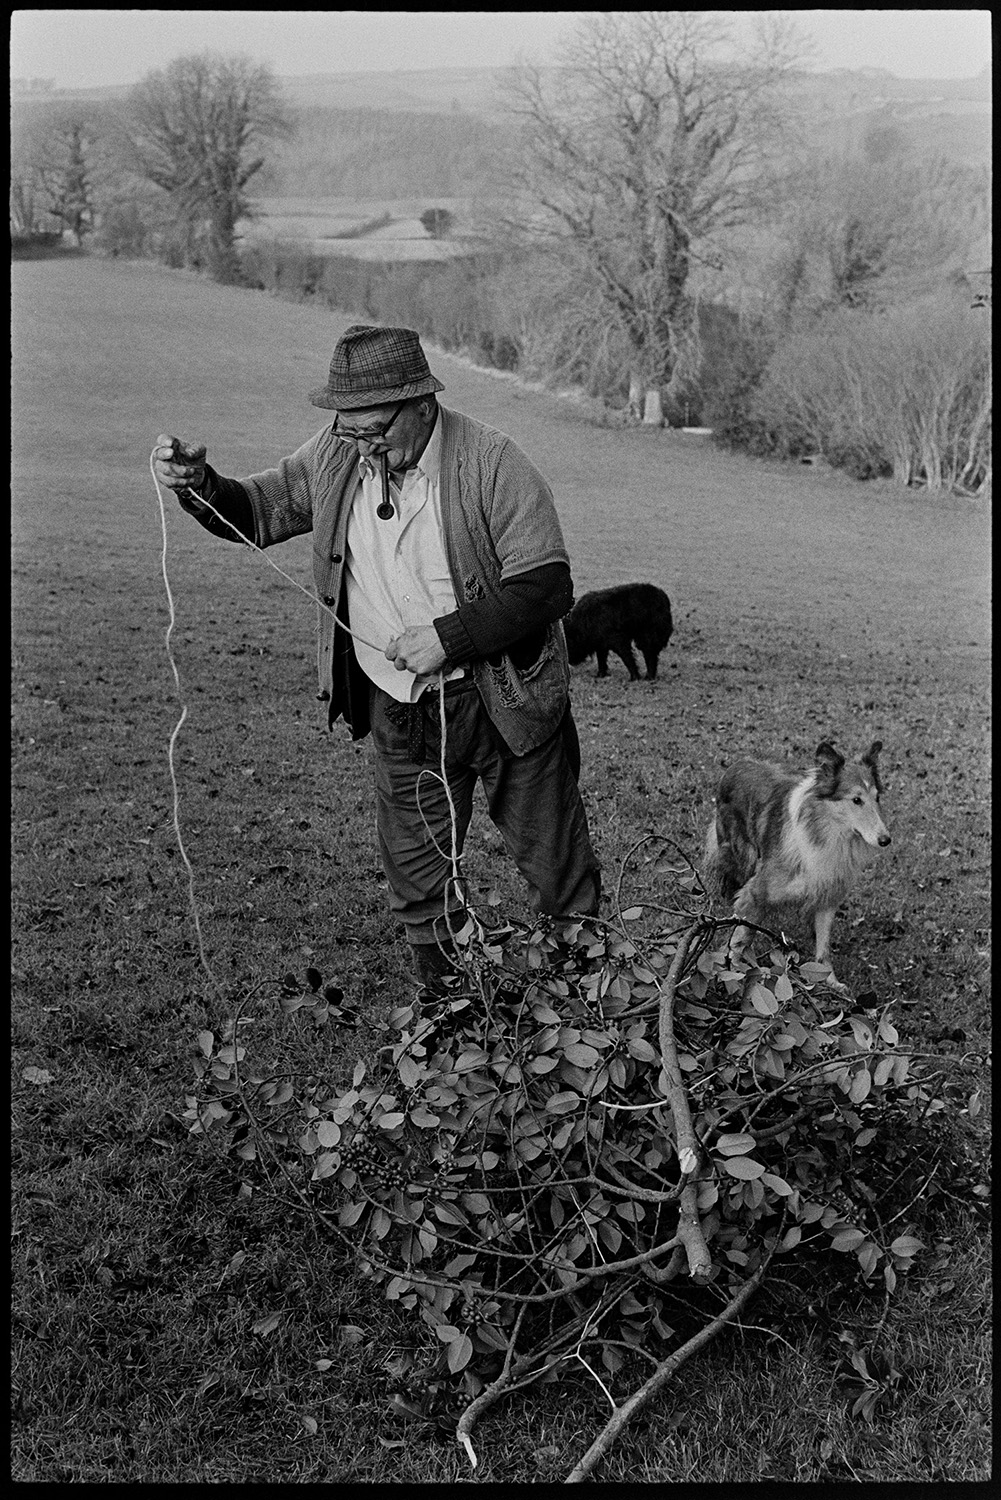 Farmer collecting holly for Christmas decorations, dogs. 
[Archie Parkhouse bundling and tying up holly for Christmas decorations in a field at Langham, Dolton. He is smoking a pipe and accompanied by his two dogs.]